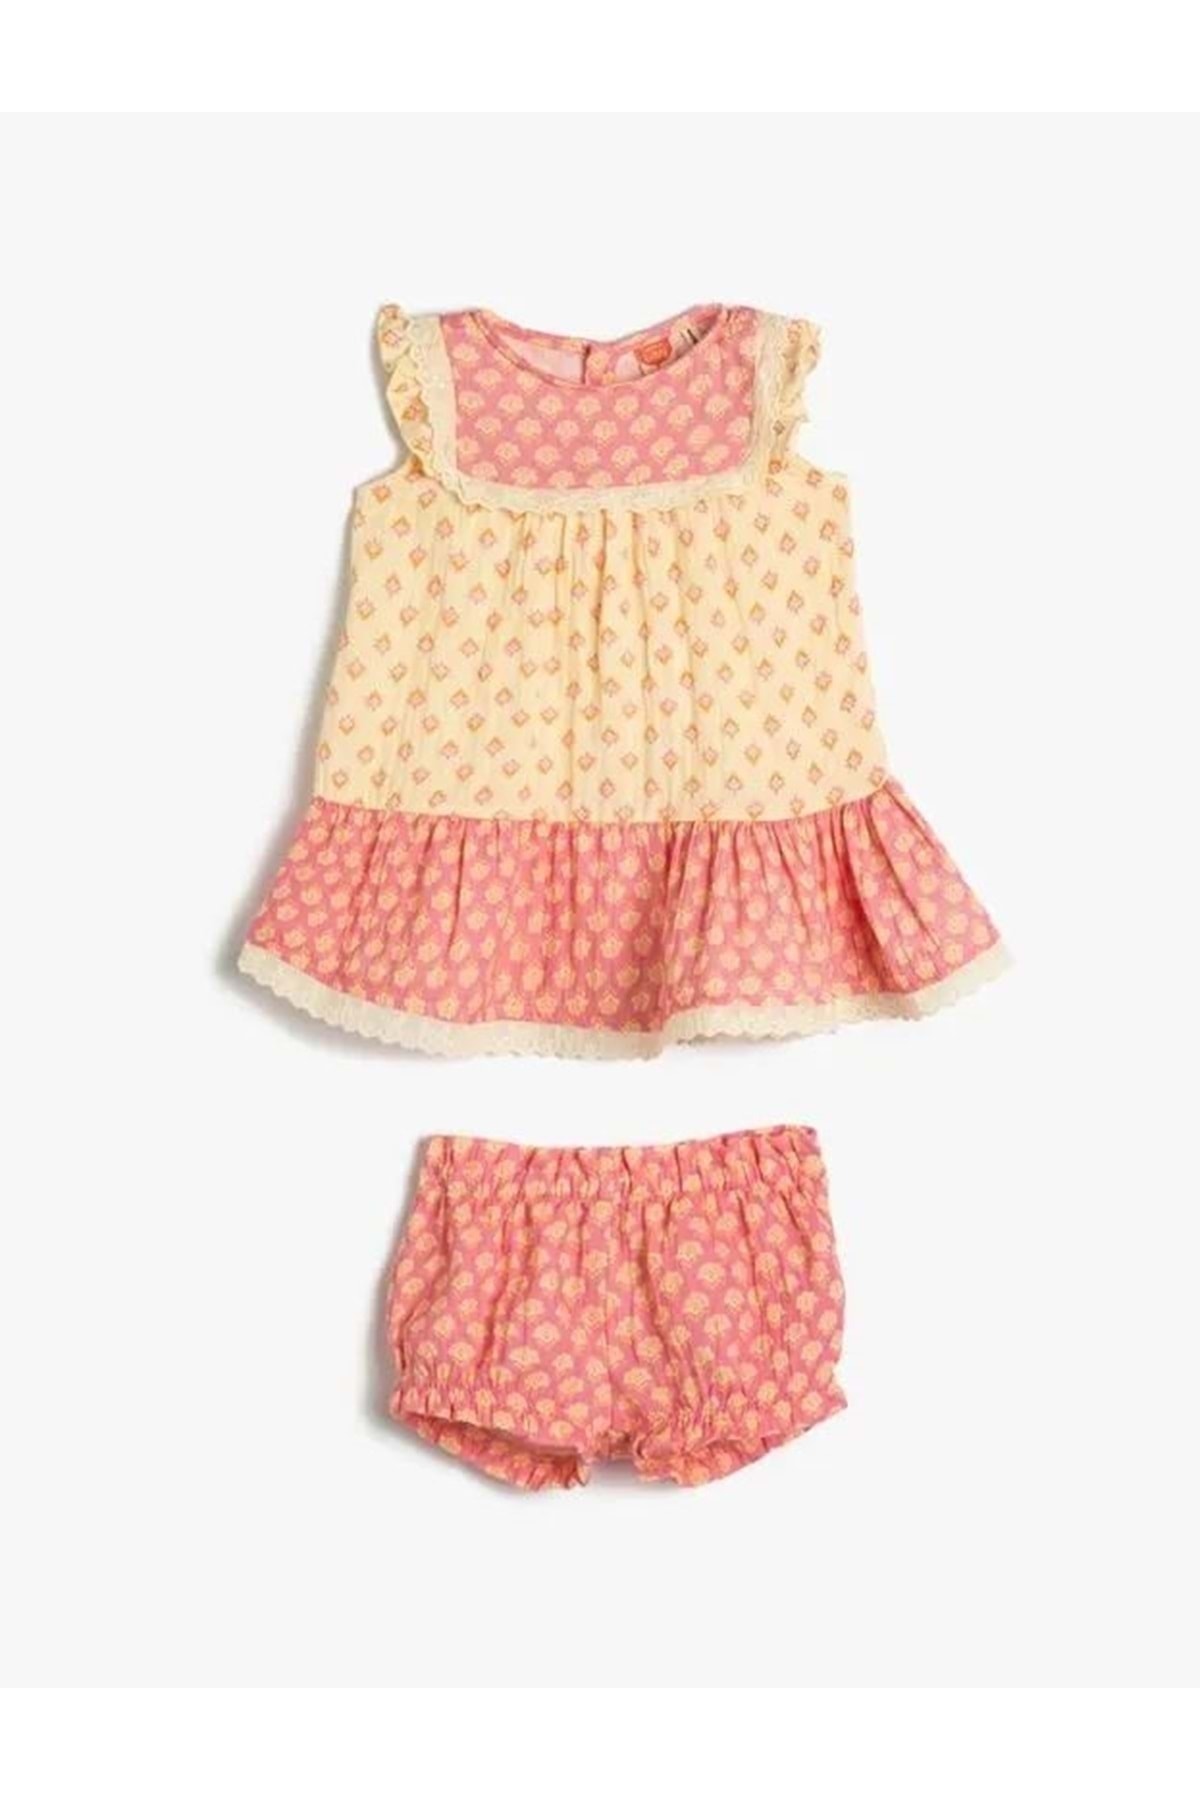 Koton Baby Girl Clothing Dress 3SMG80129AW Pink Patterned Pink Patterned